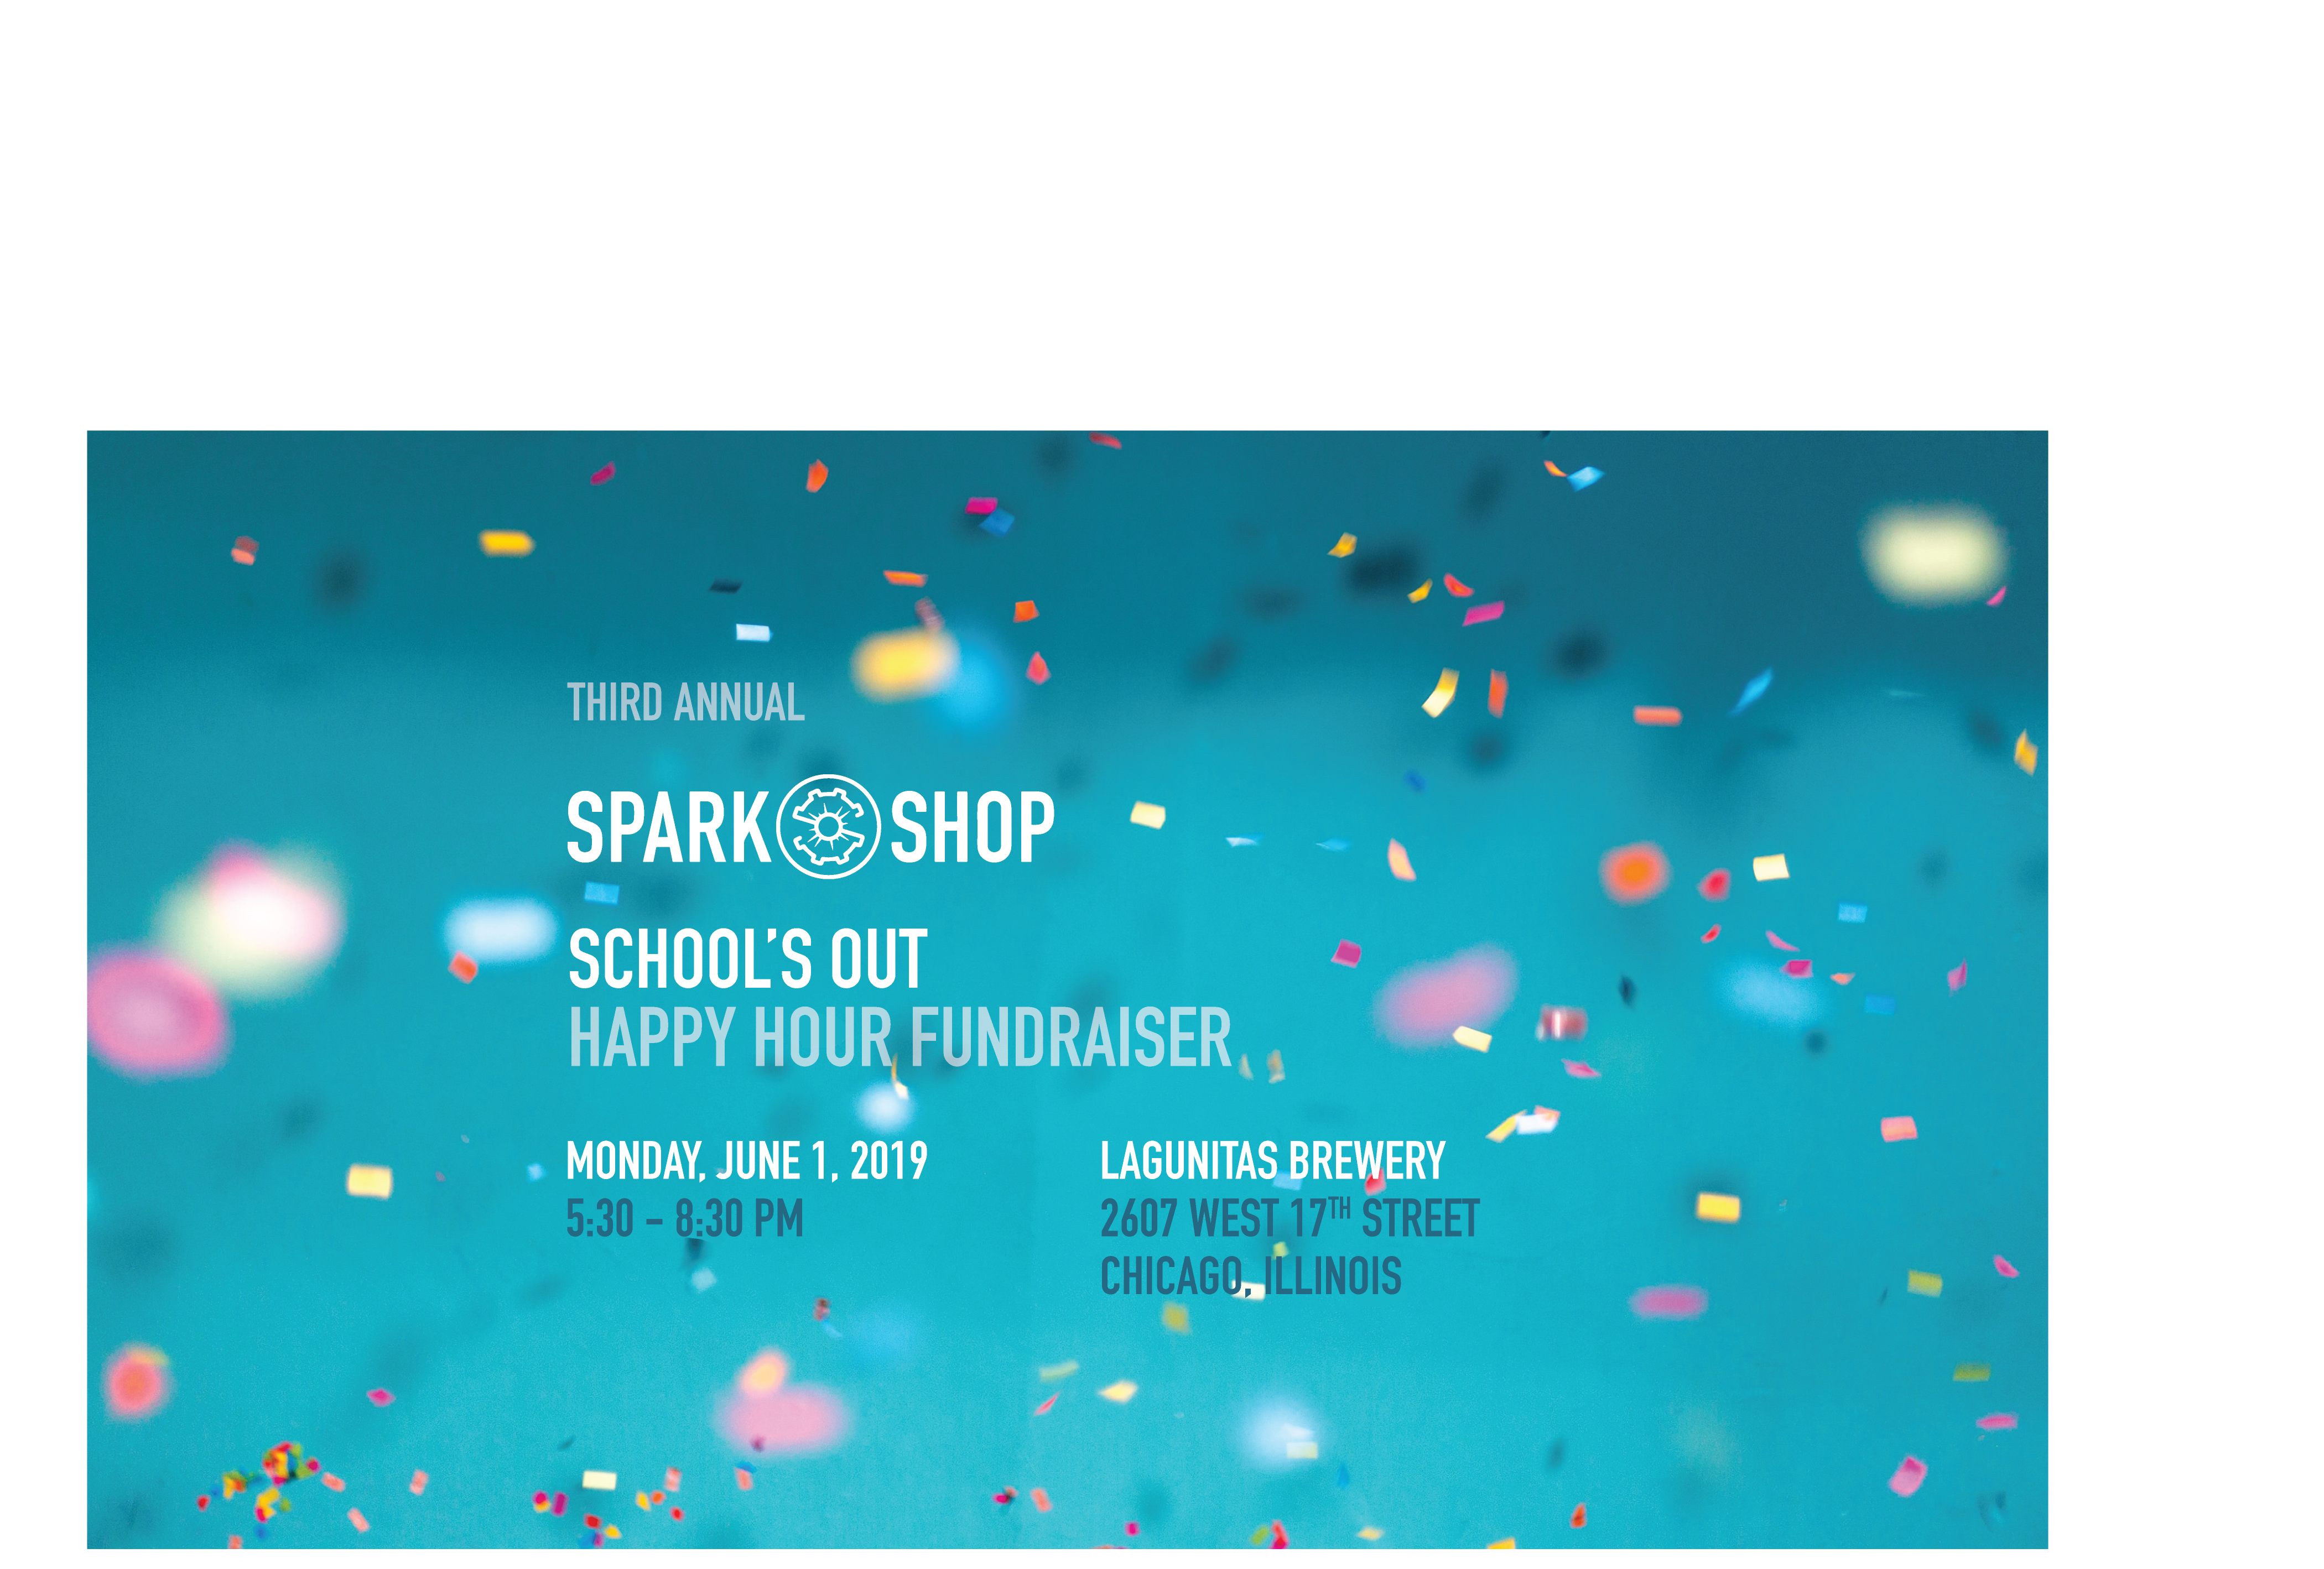 School's Out! SparkShop Happy Hour